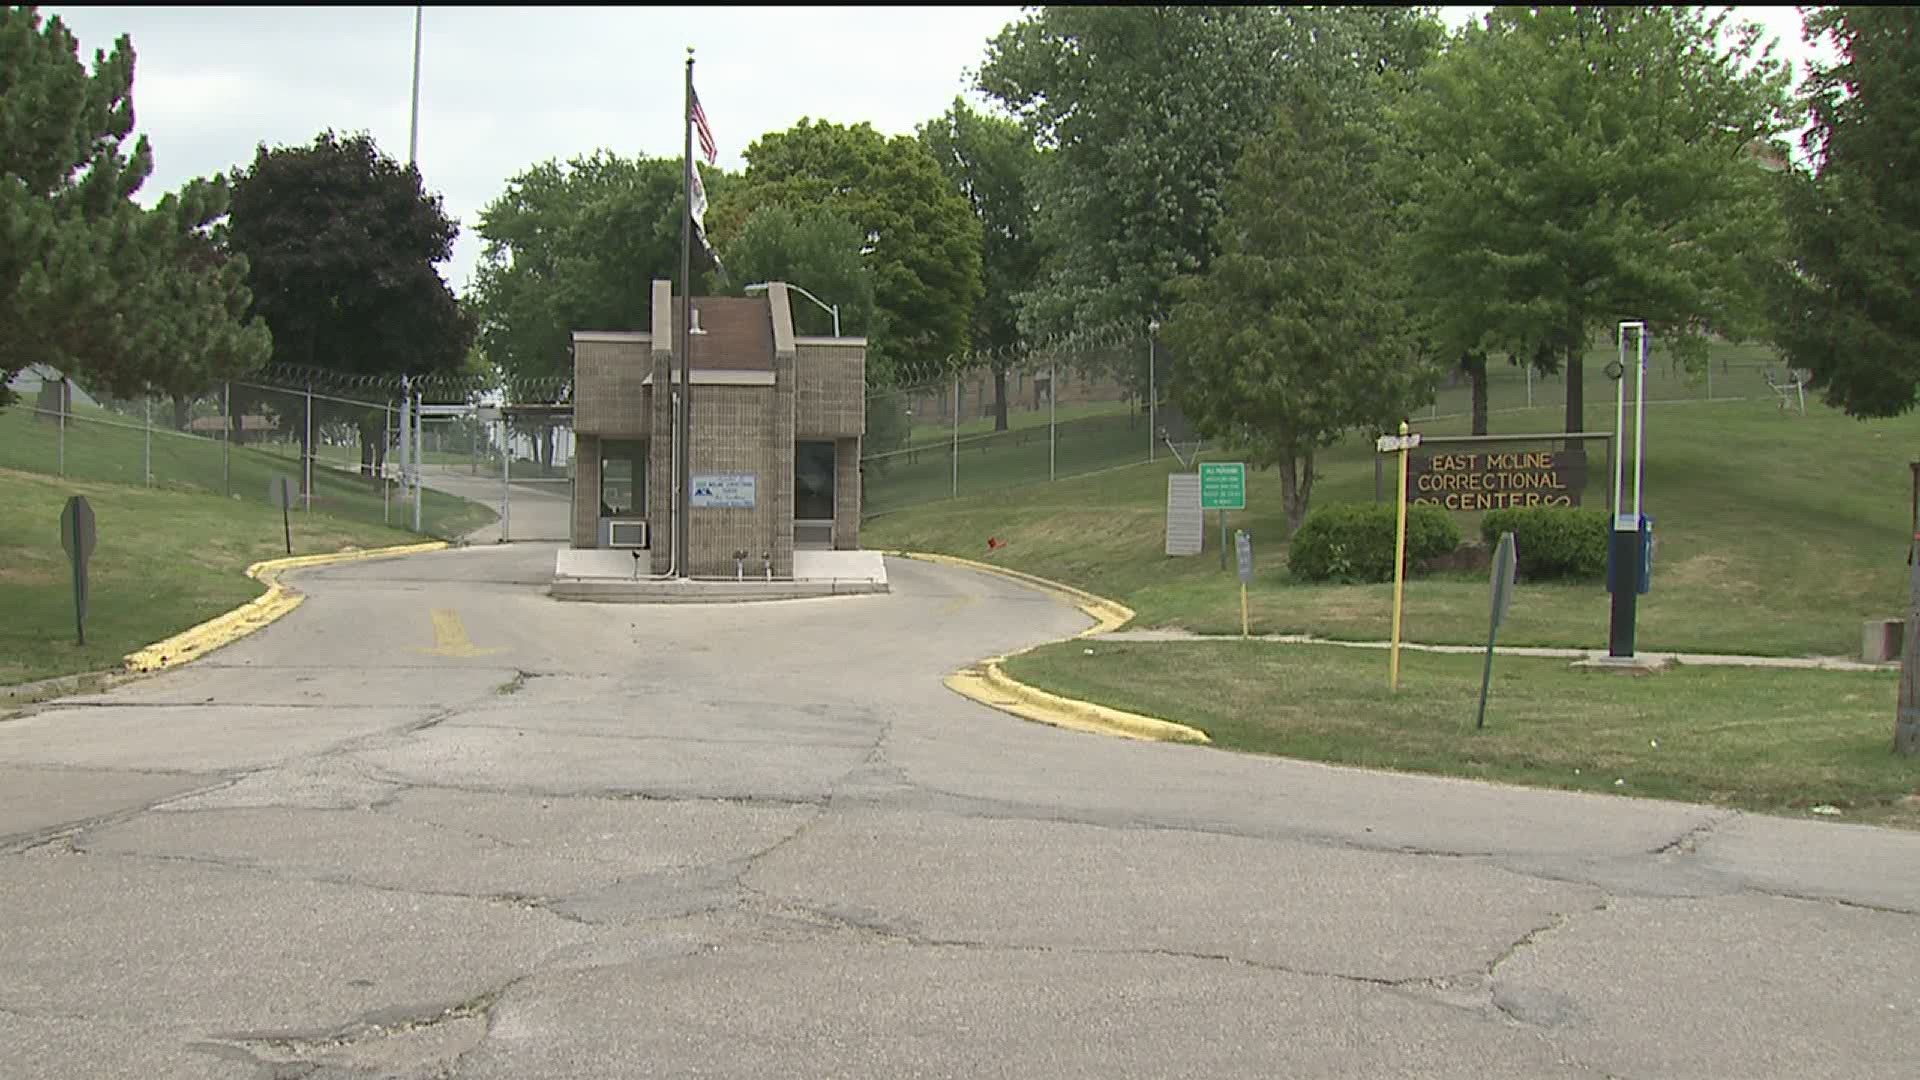 40 of Rock Island County's reported cases from June 27th come from the facility.